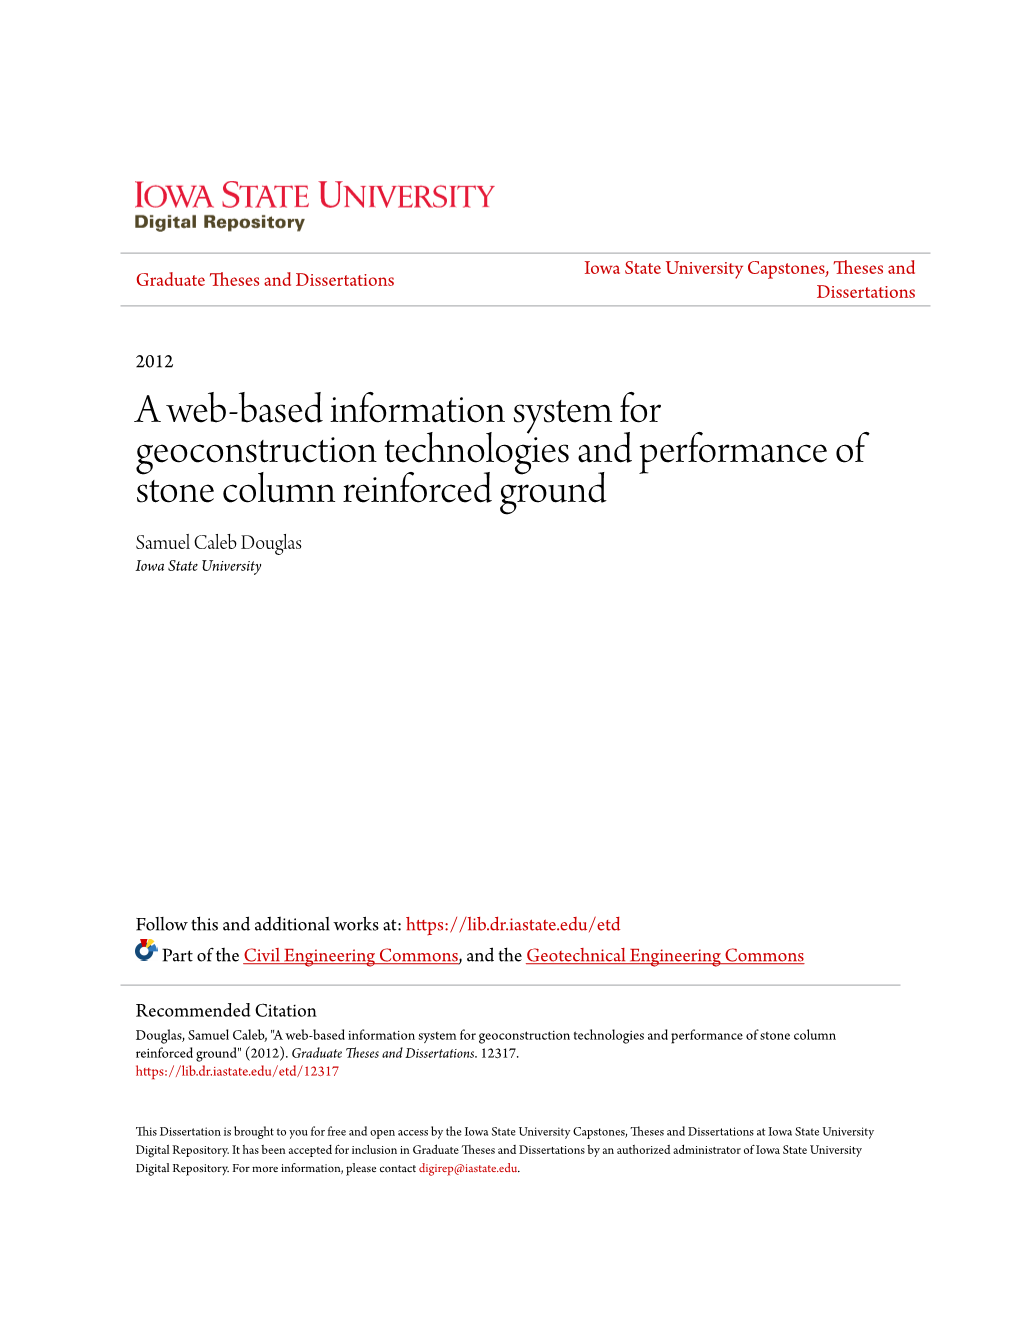 A Web-Based Information System for Geoconstruction Technologies and Performance of Stone Column Reinforced Ground Samuel Caleb Douglas Iowa State University